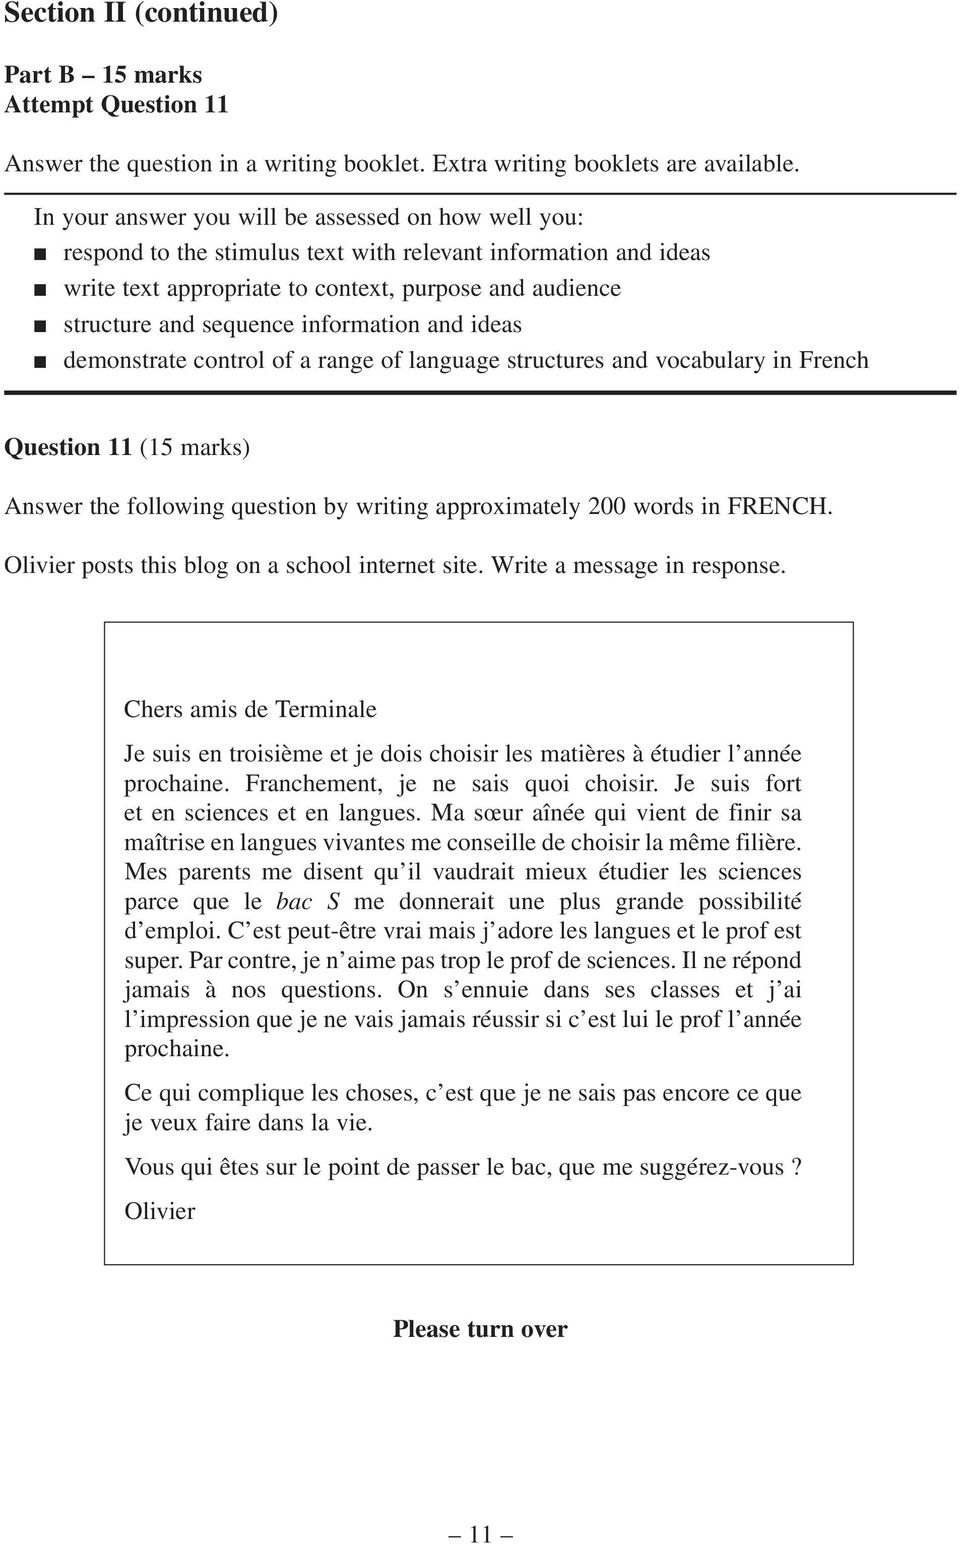 information and ideas demonstrate control of a range of language structures and vocabulary in French Question 11 (15 marks) Answer the following question by writing approximately 200 words in FRENCH.